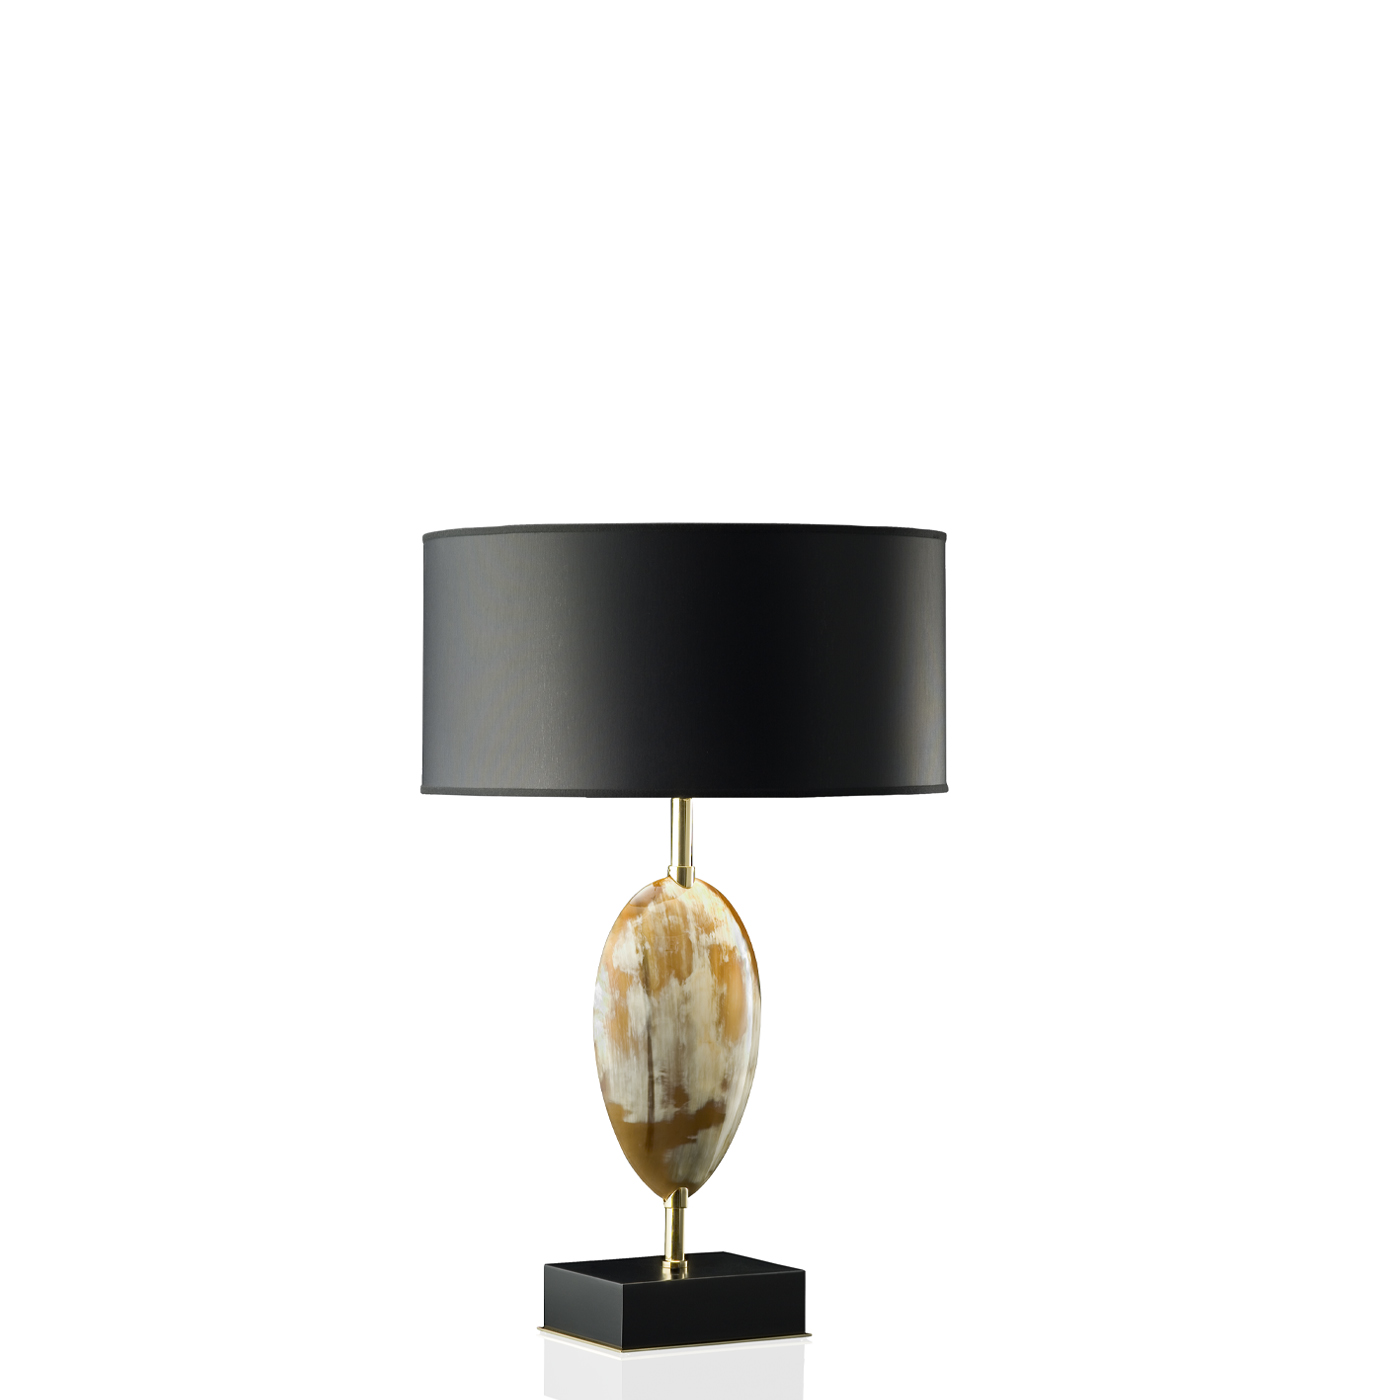 Lamps - Eclisse table lamp in horn and 24k gold plated brass - Arcahorn